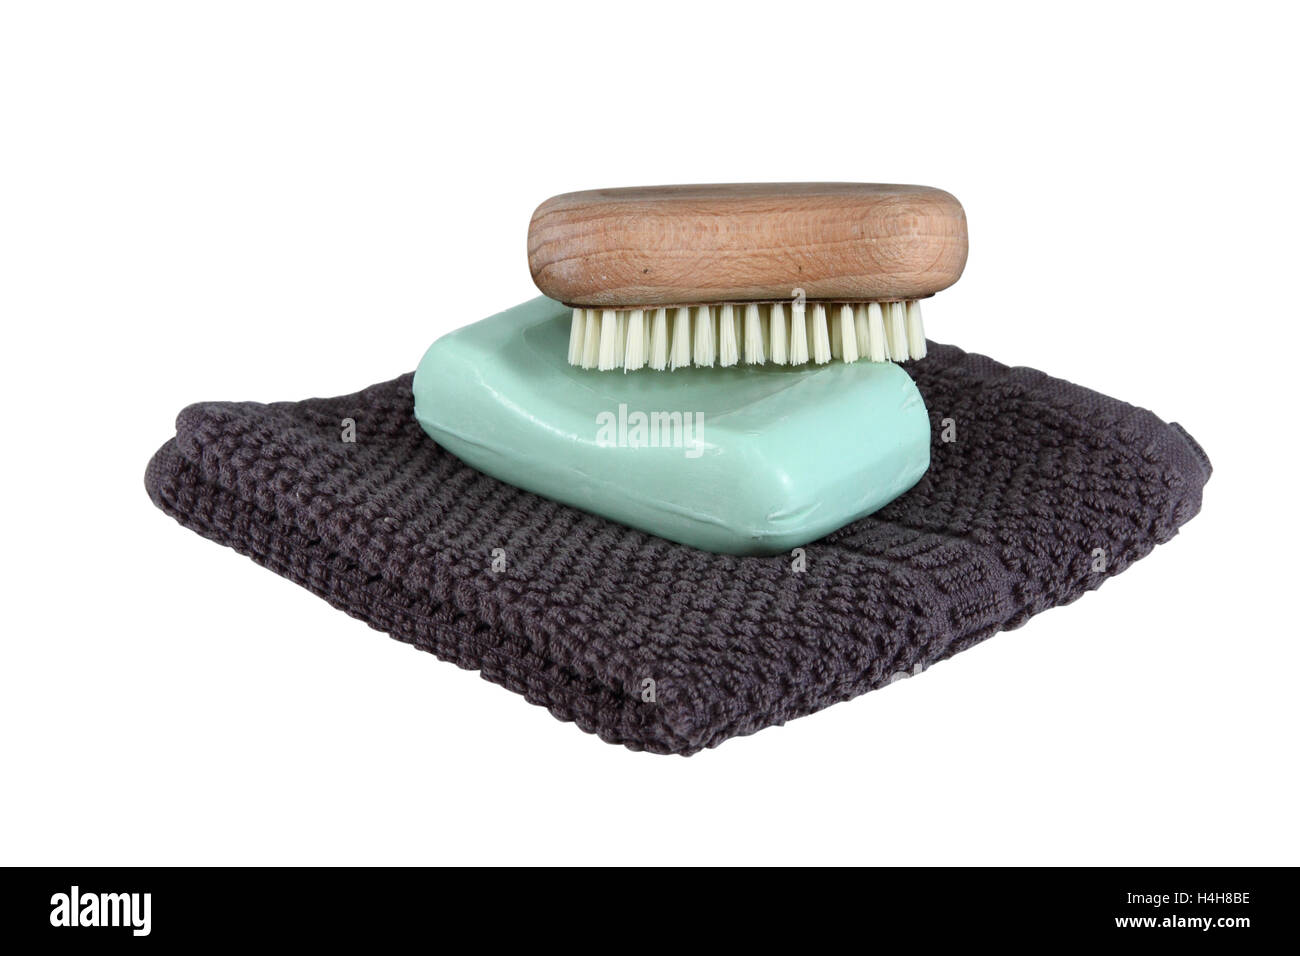 A simple mans face wash collection isolated over white.  Includes face cloth, bar of soap, and a scrub brush. Stock Photo